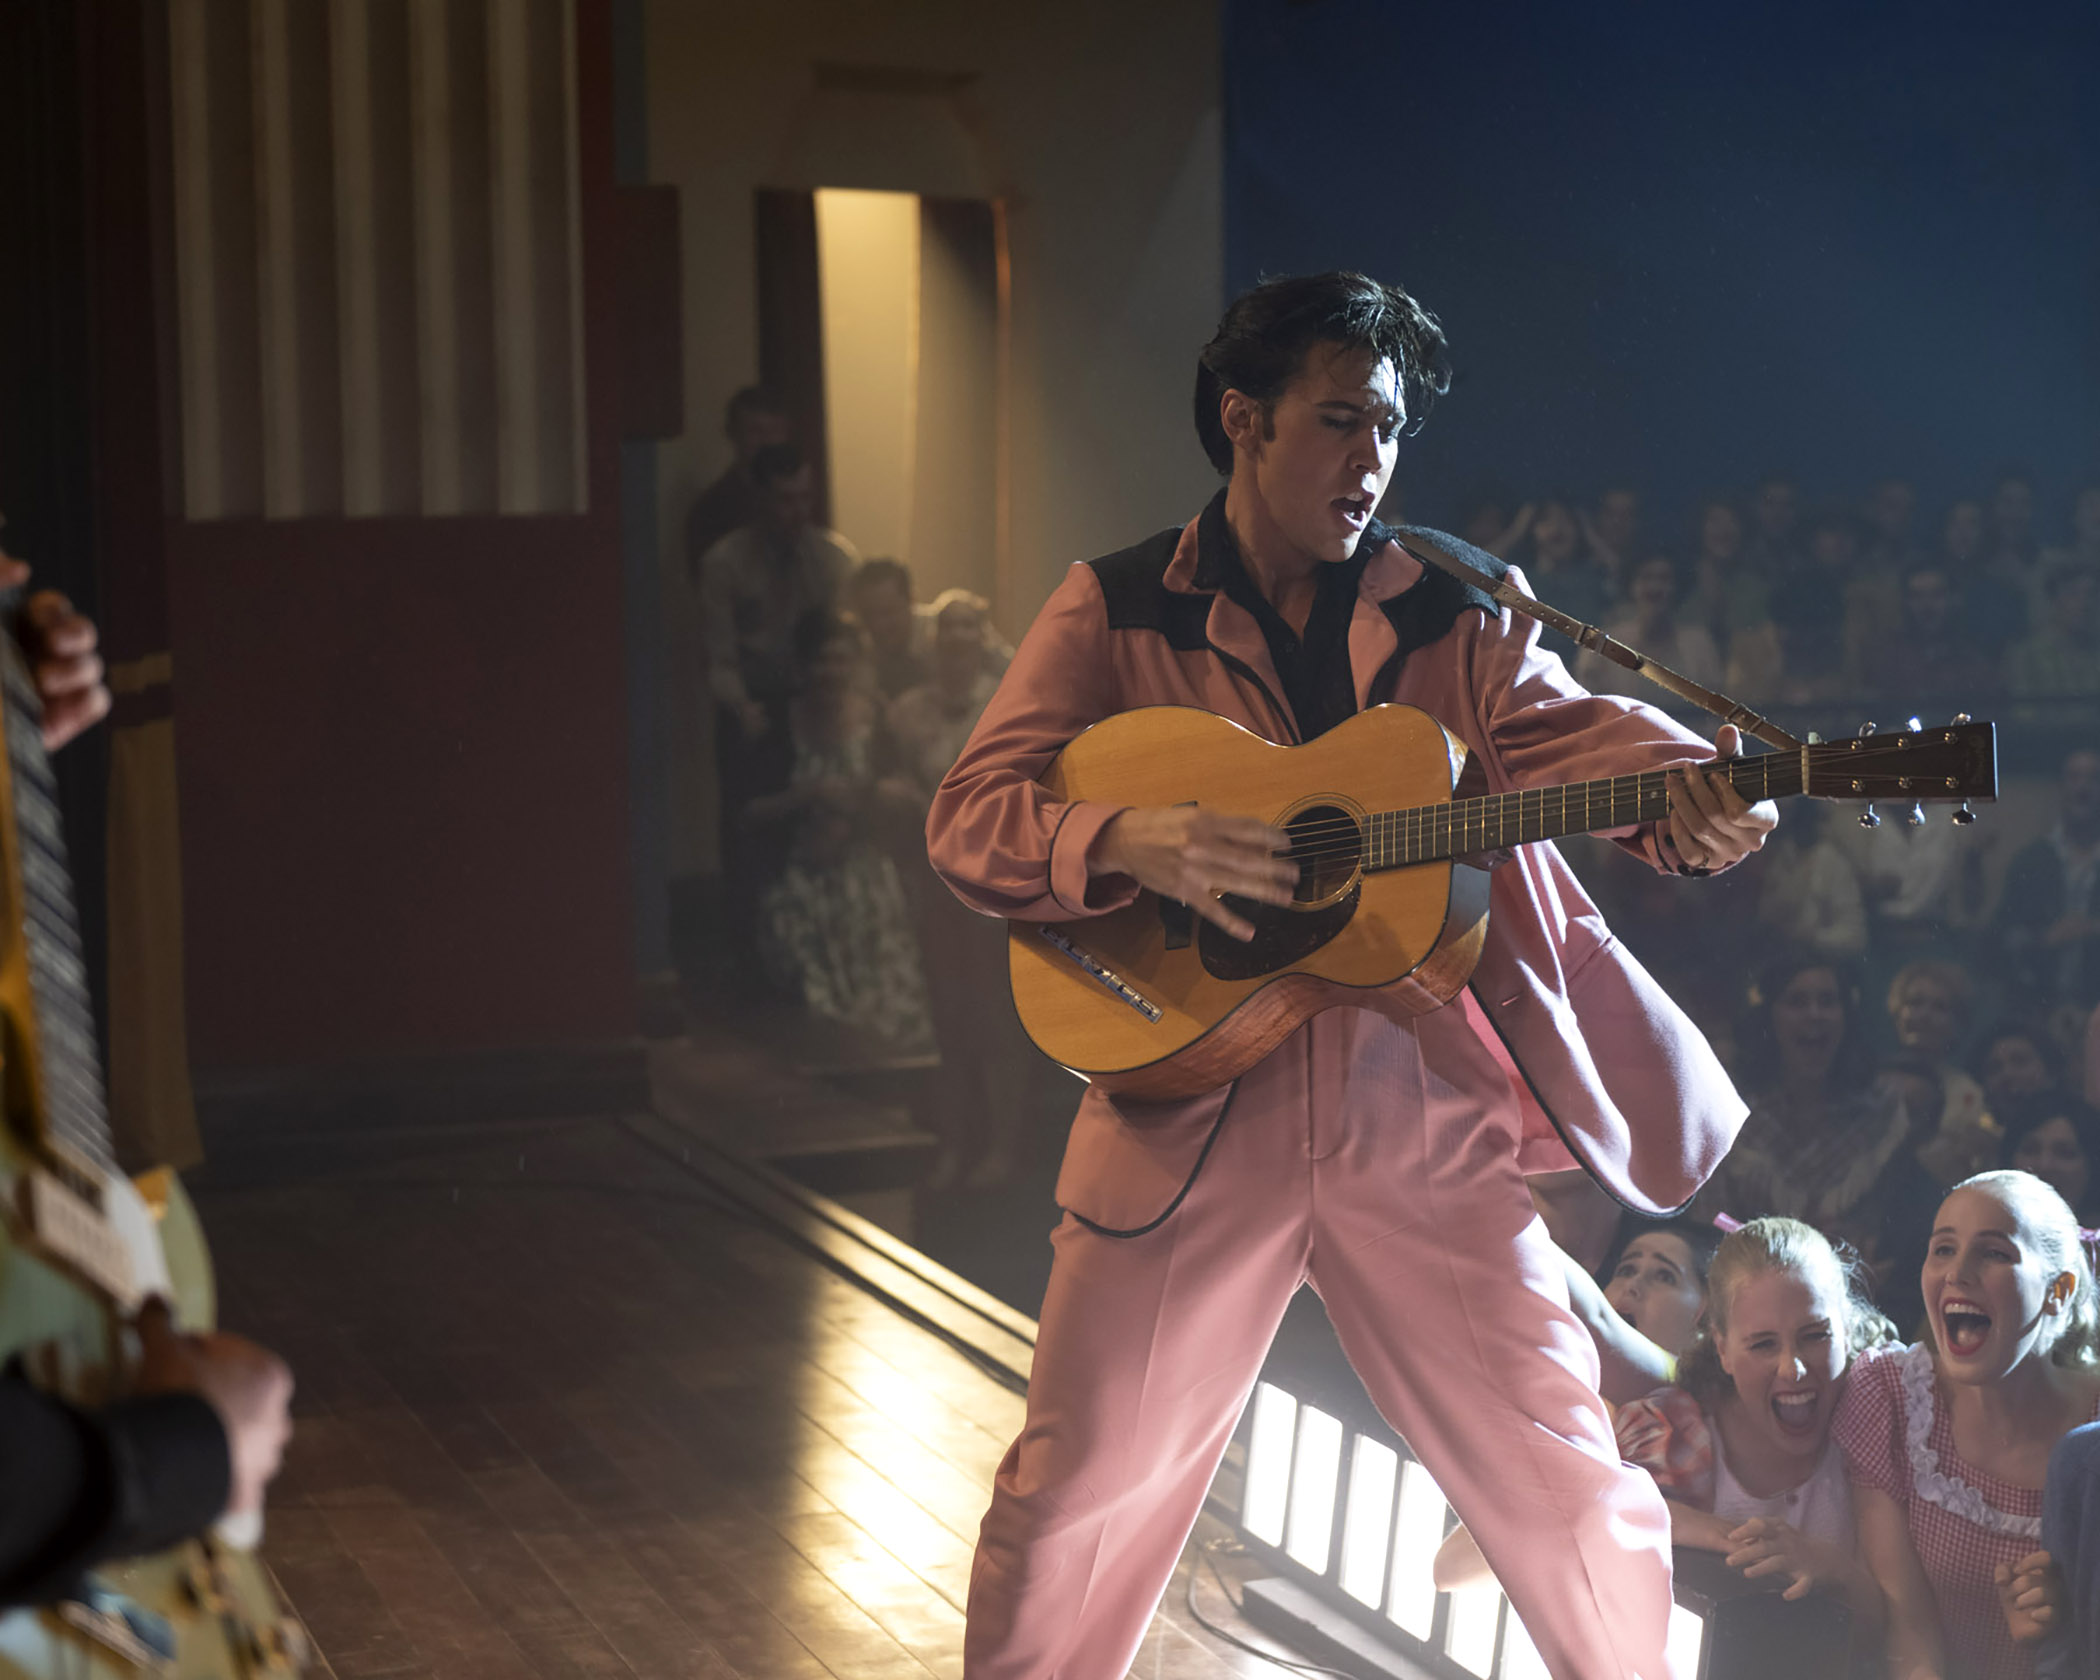 Elvis Trailer | Elvis May Have Left The Building But Austin Butler Is Bringing Him Back To Theaters